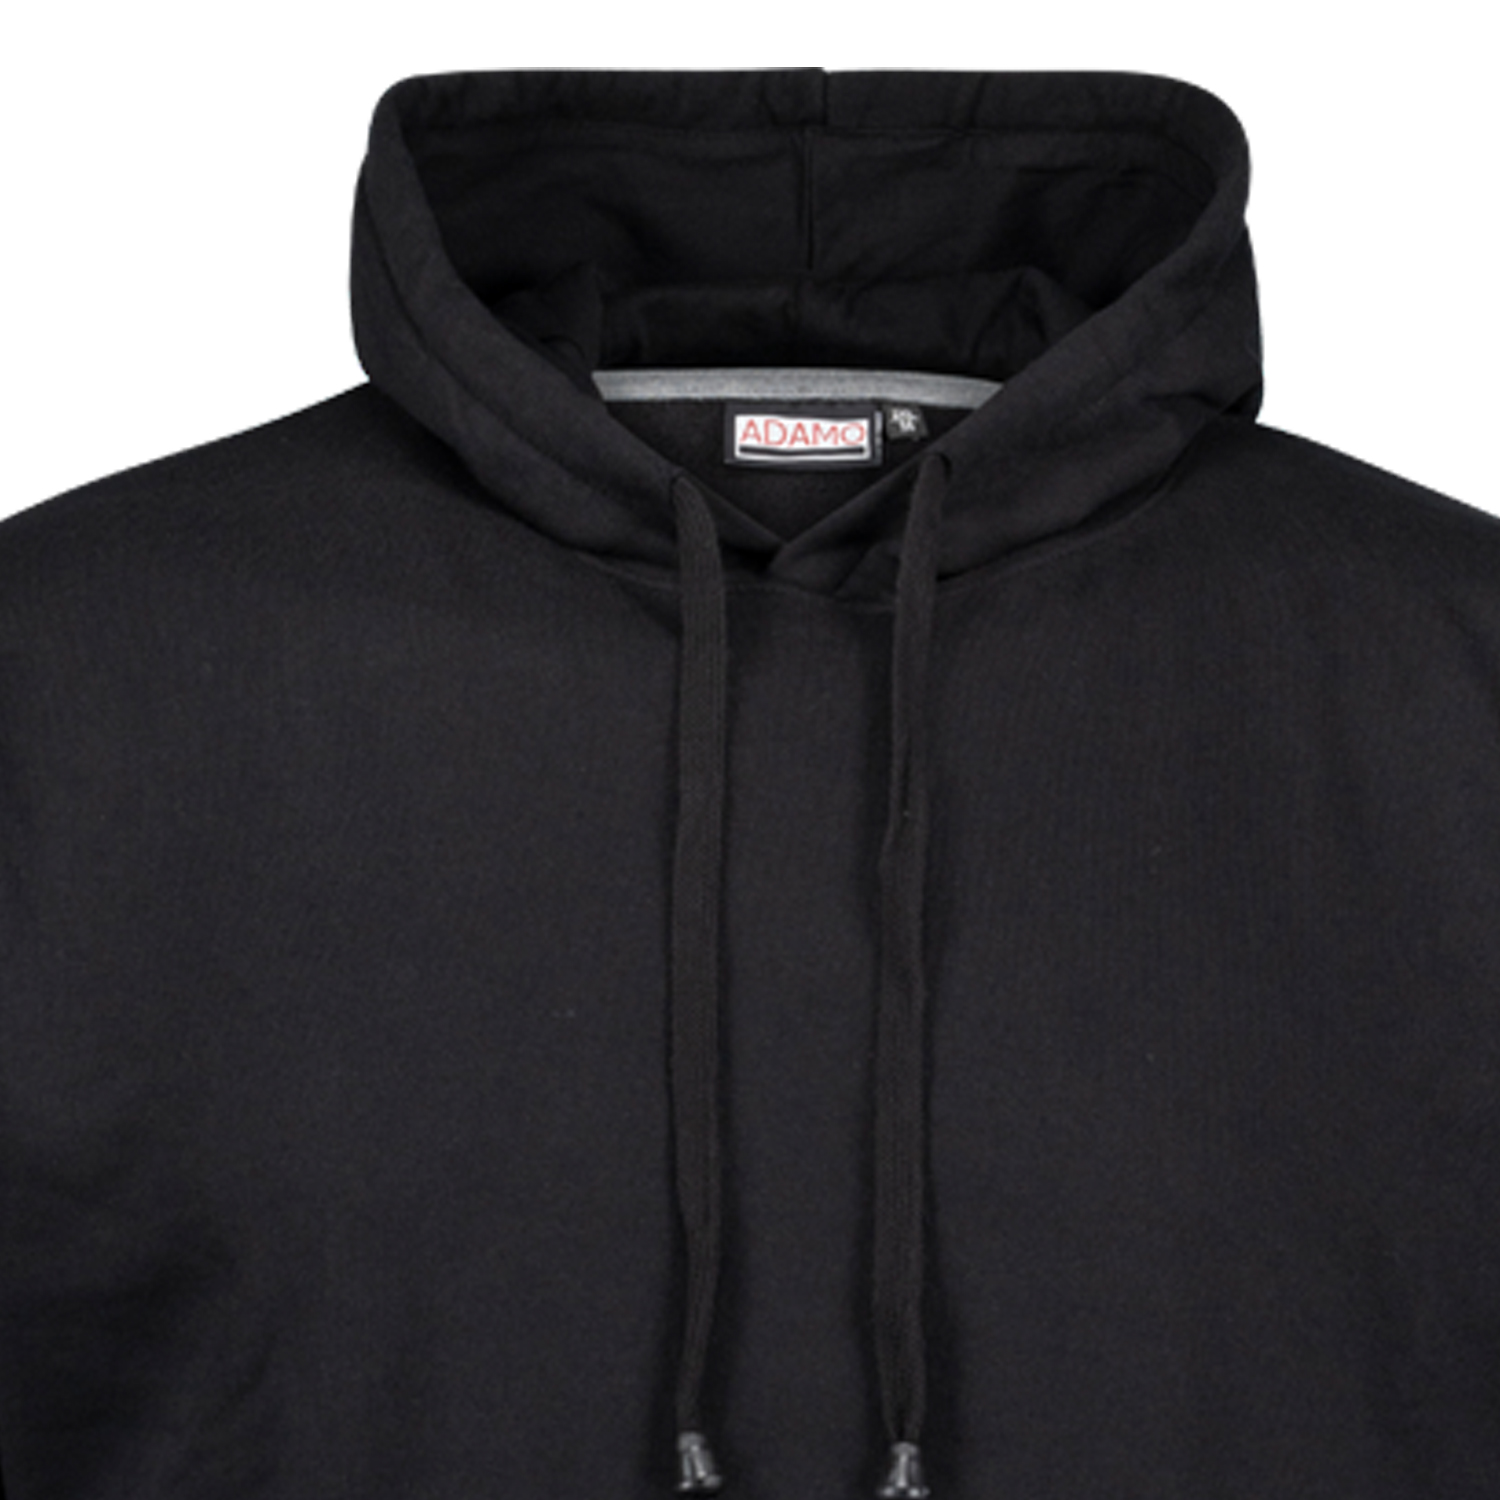 Hooded sweatshirt TALL FIT in black for men series Atlanta by ADAMO in oversizes up to 5XLT